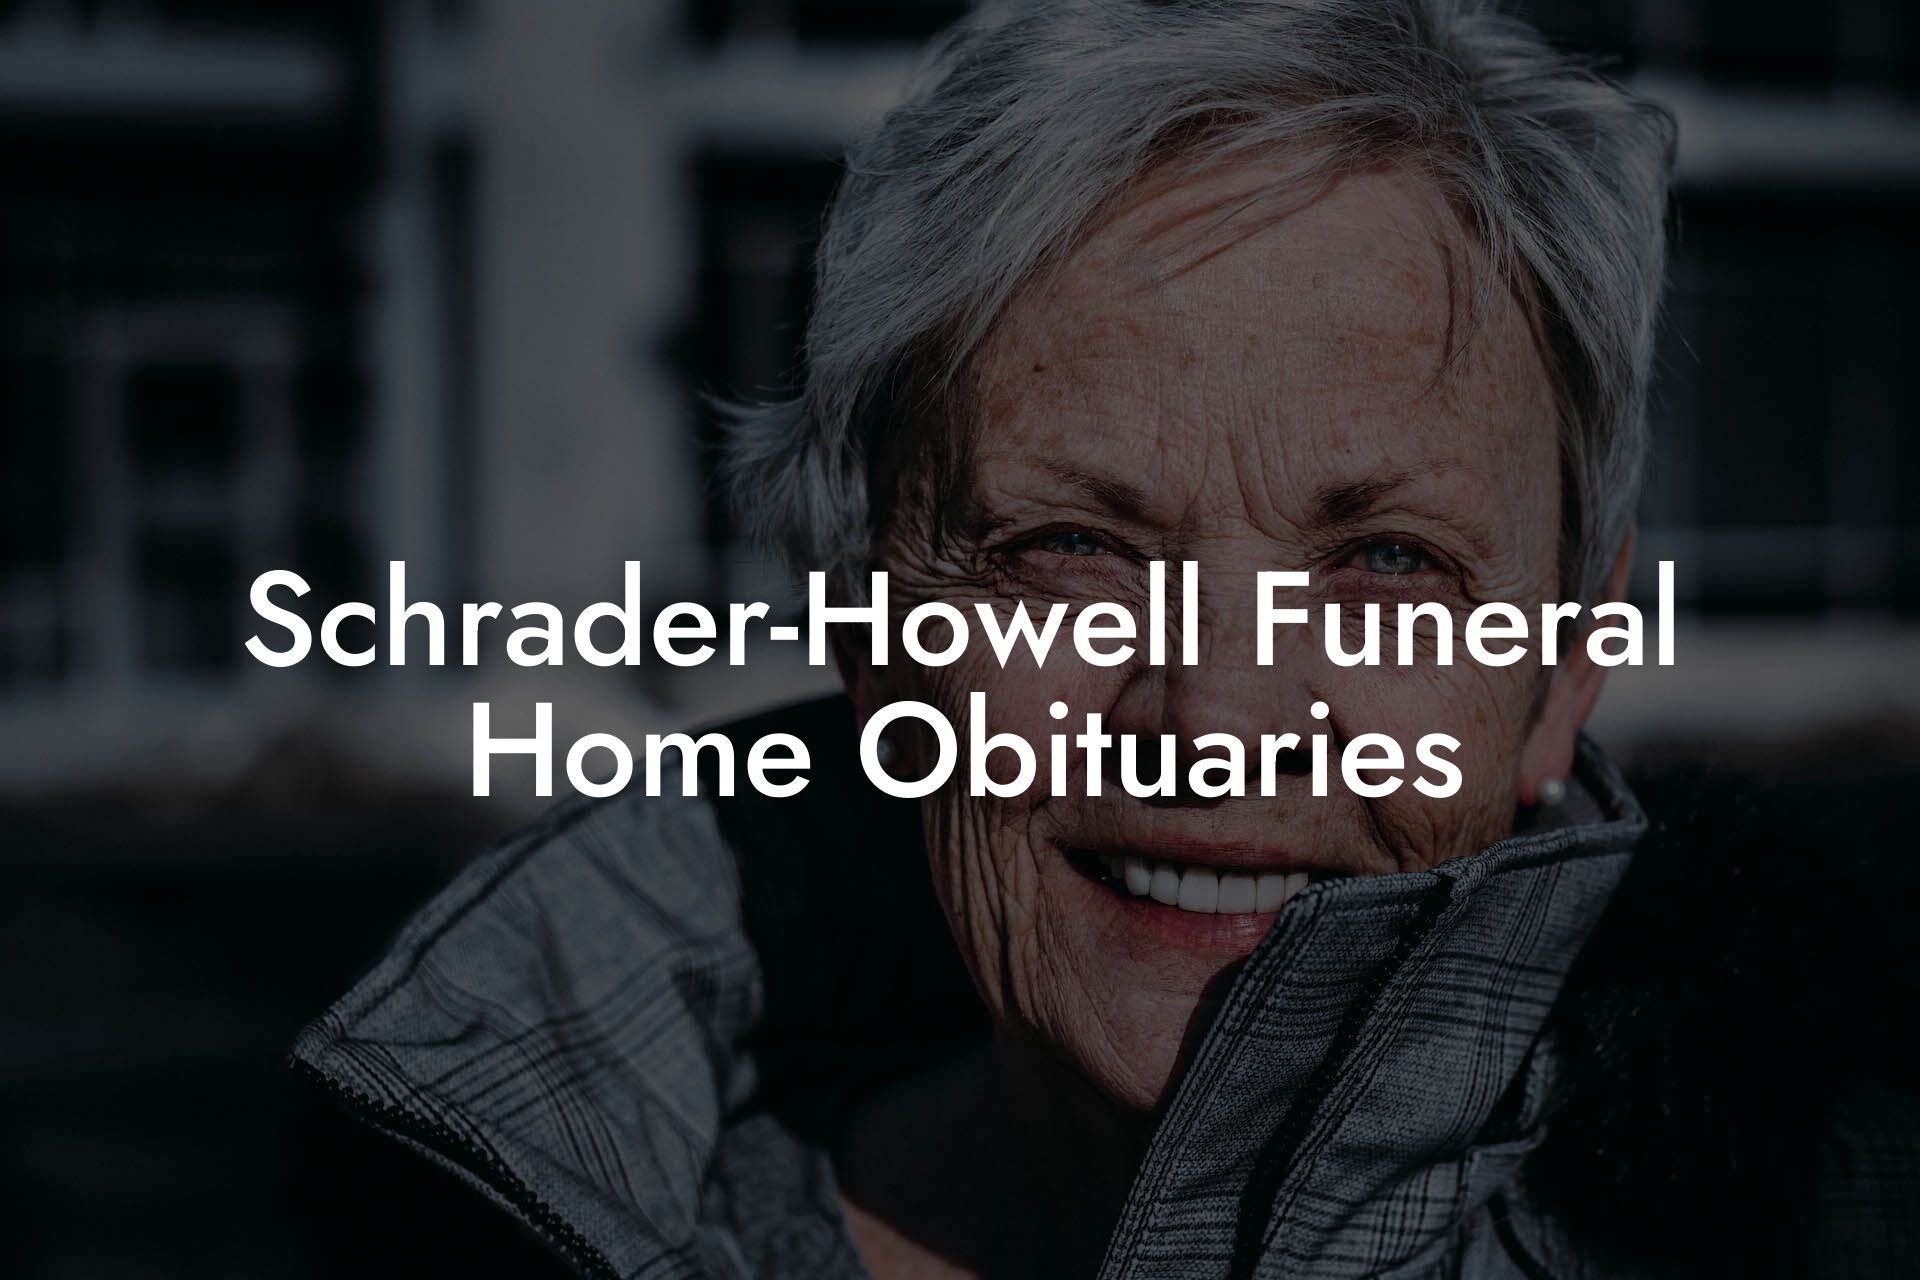 Schrader-Howell Funeral Home Obituaries